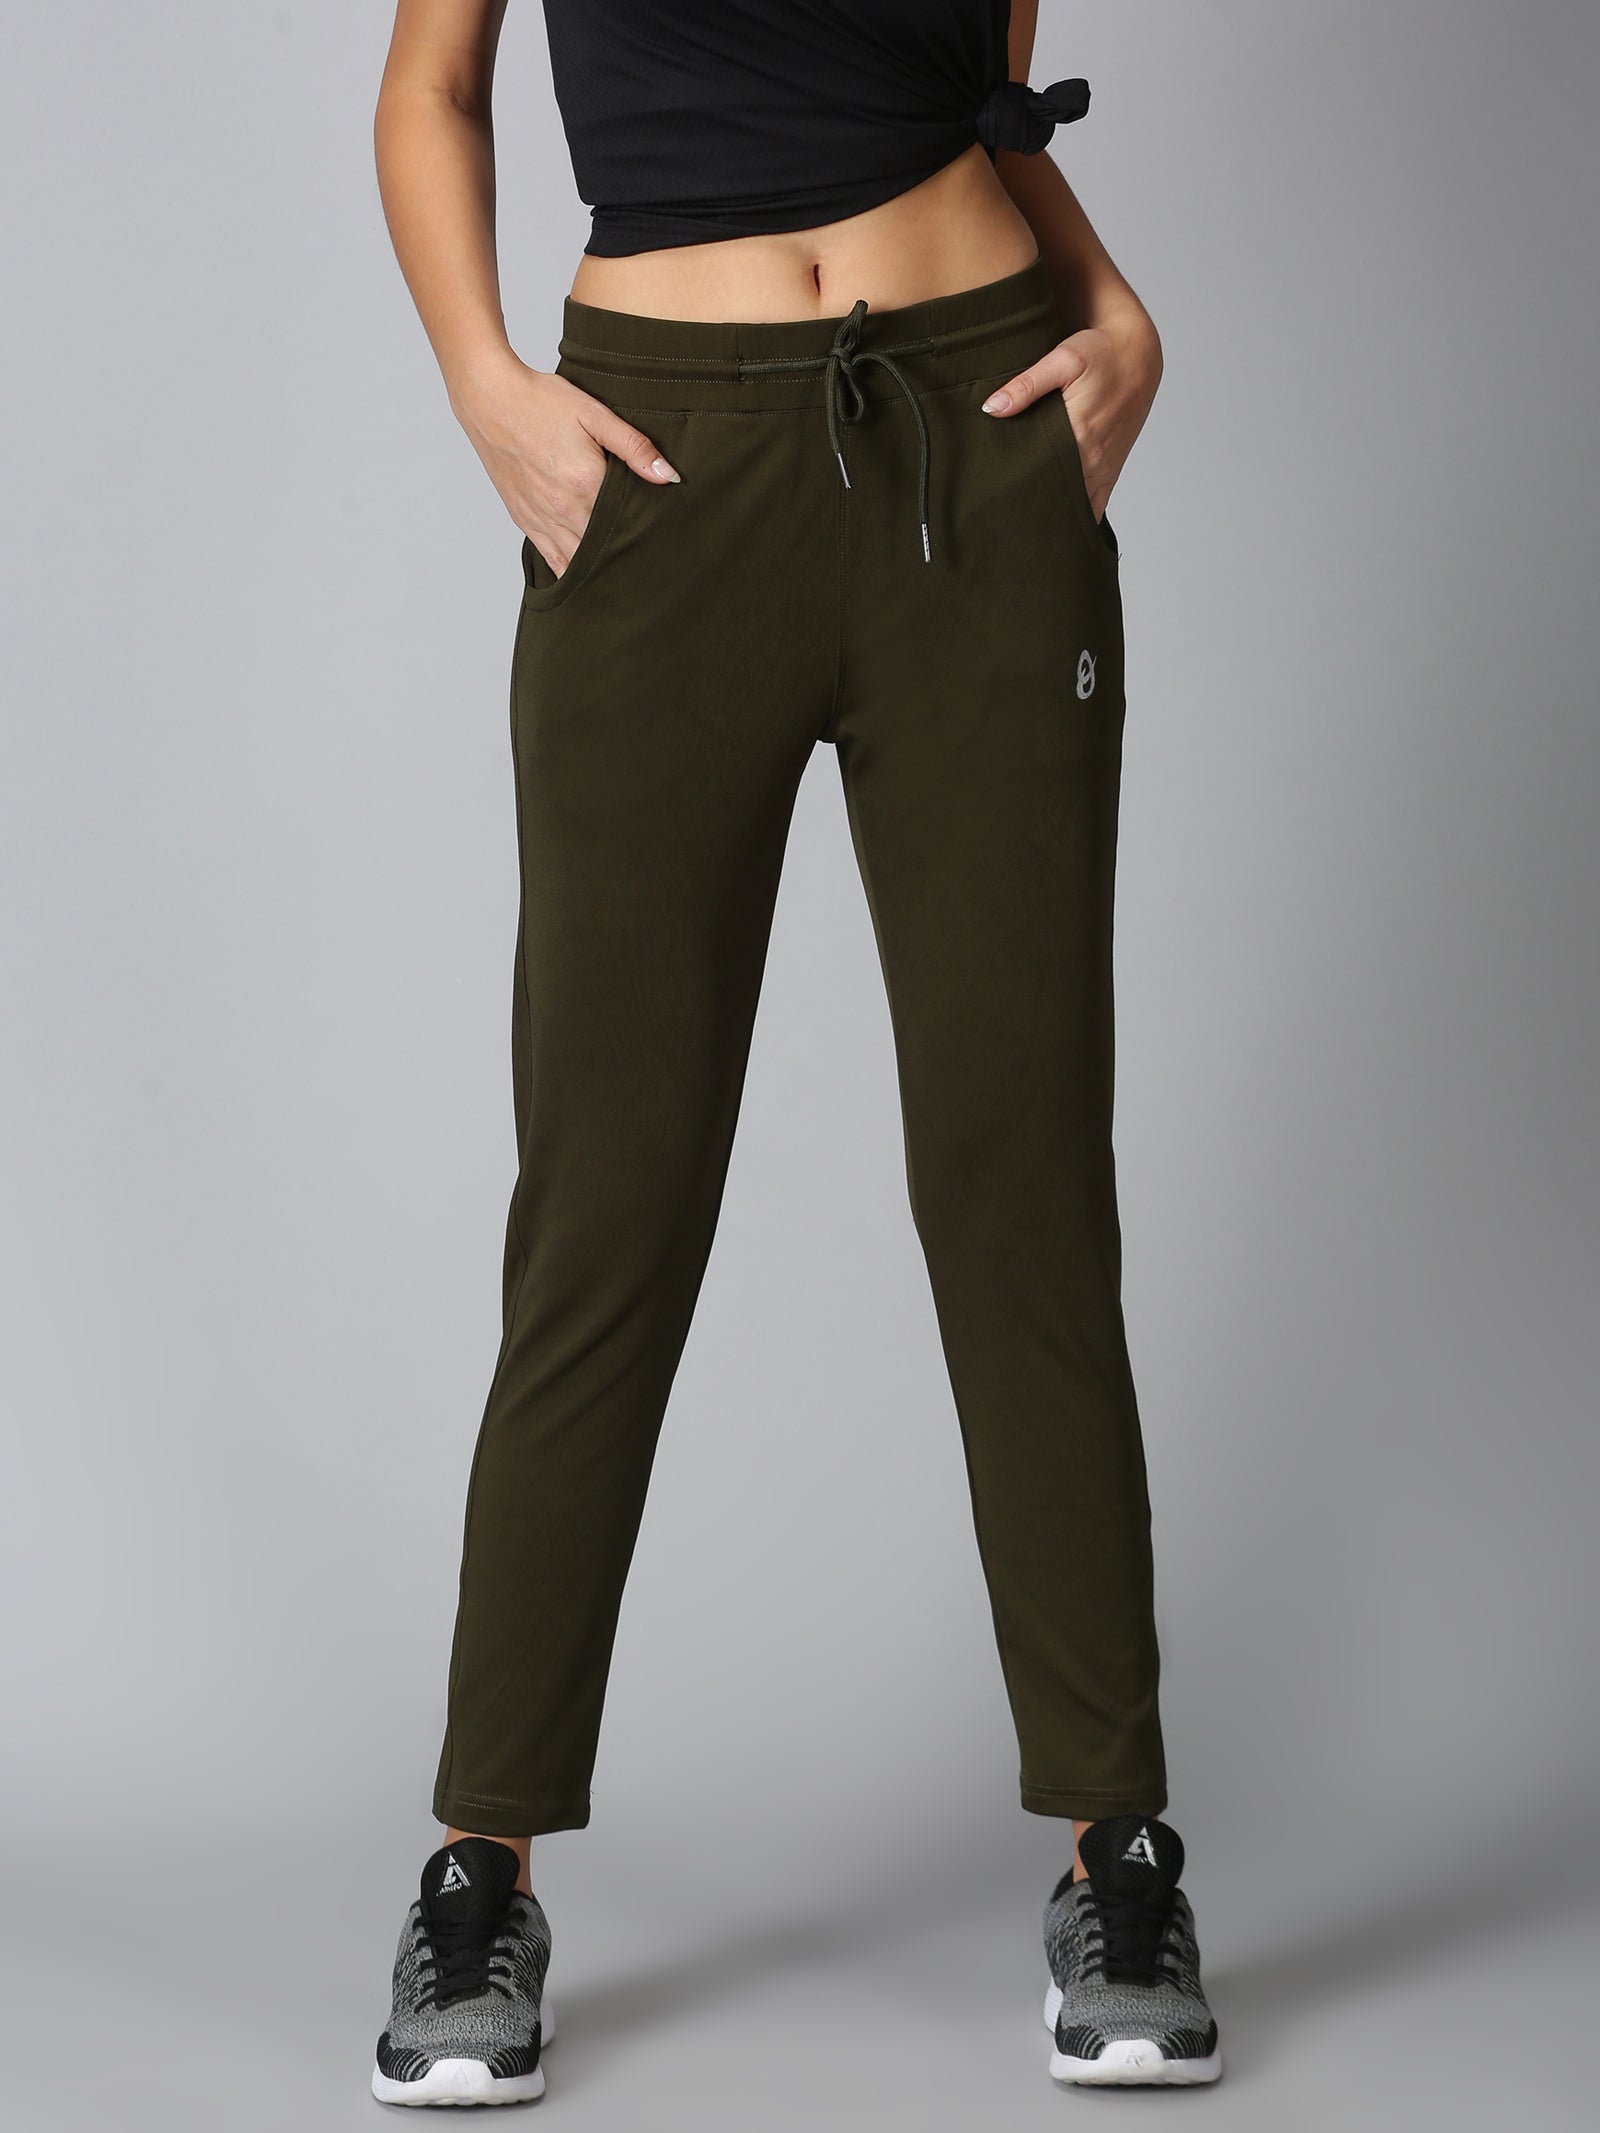 Lifestyle Athleisure Track Pant Women – ENORFY